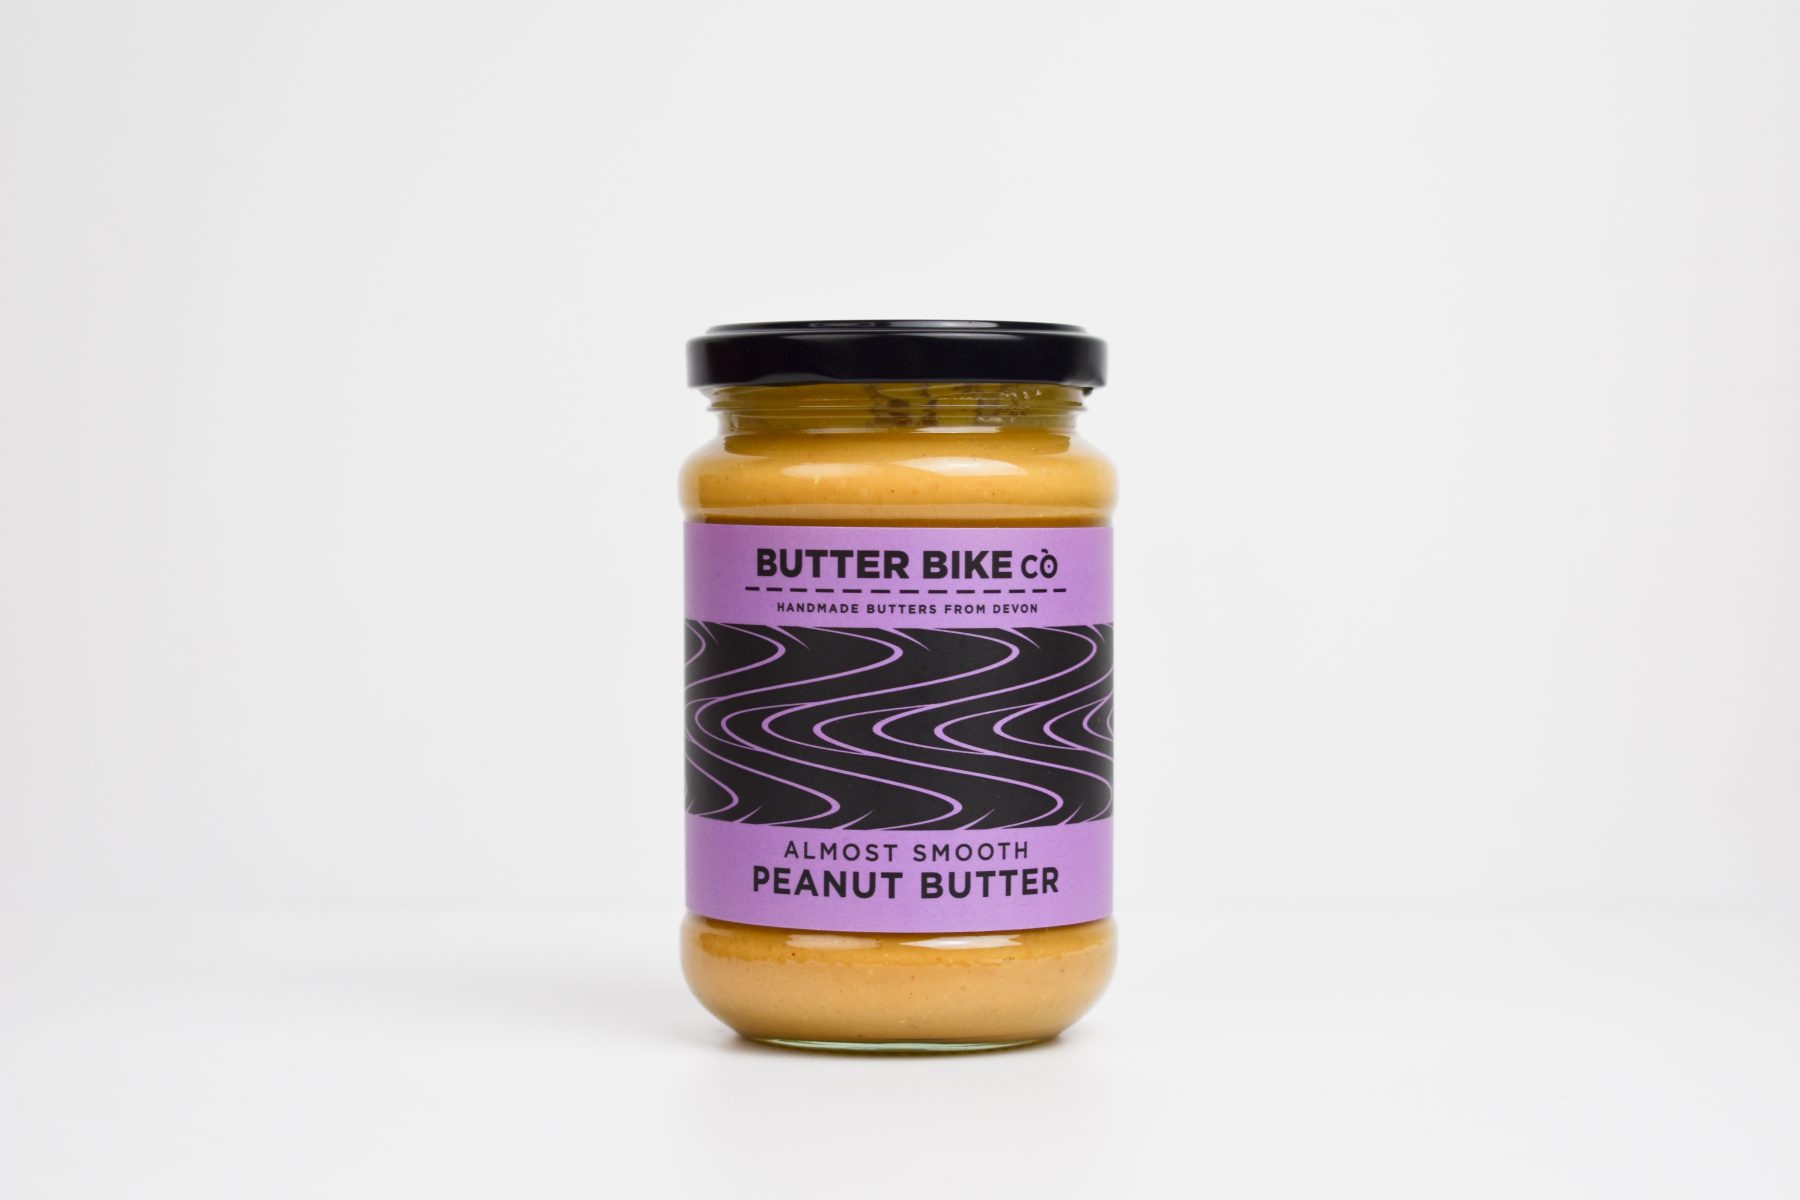 Almost Smooth Peanut Butter